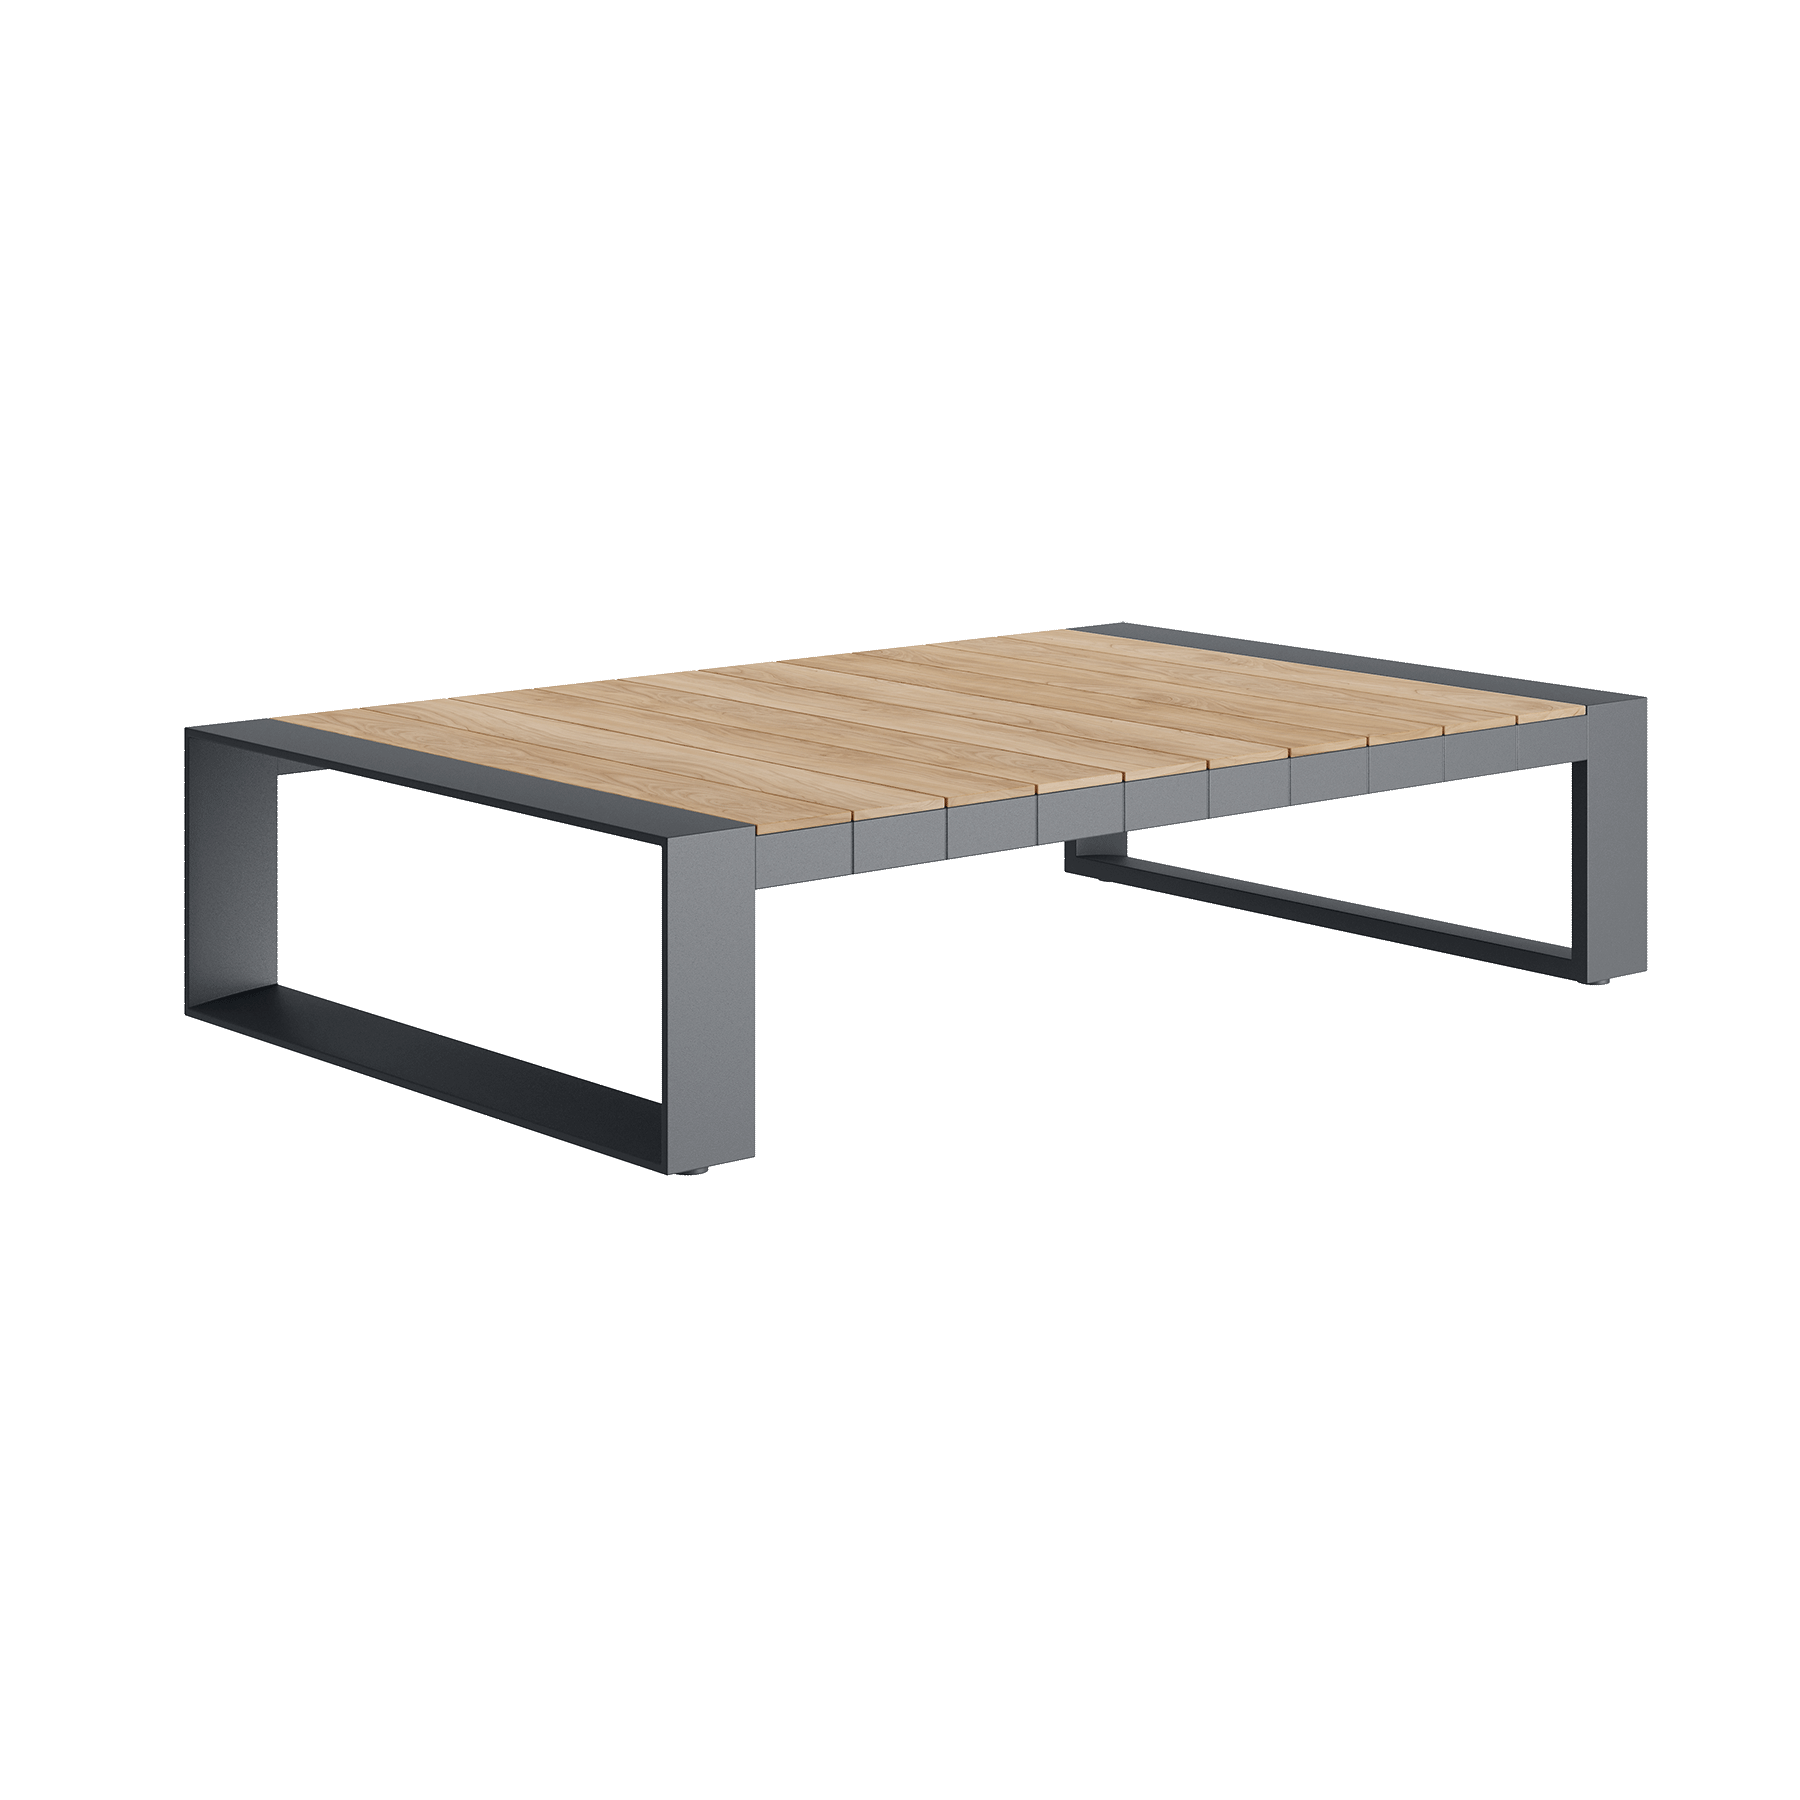 N5 coffee table product image uk garden furniture